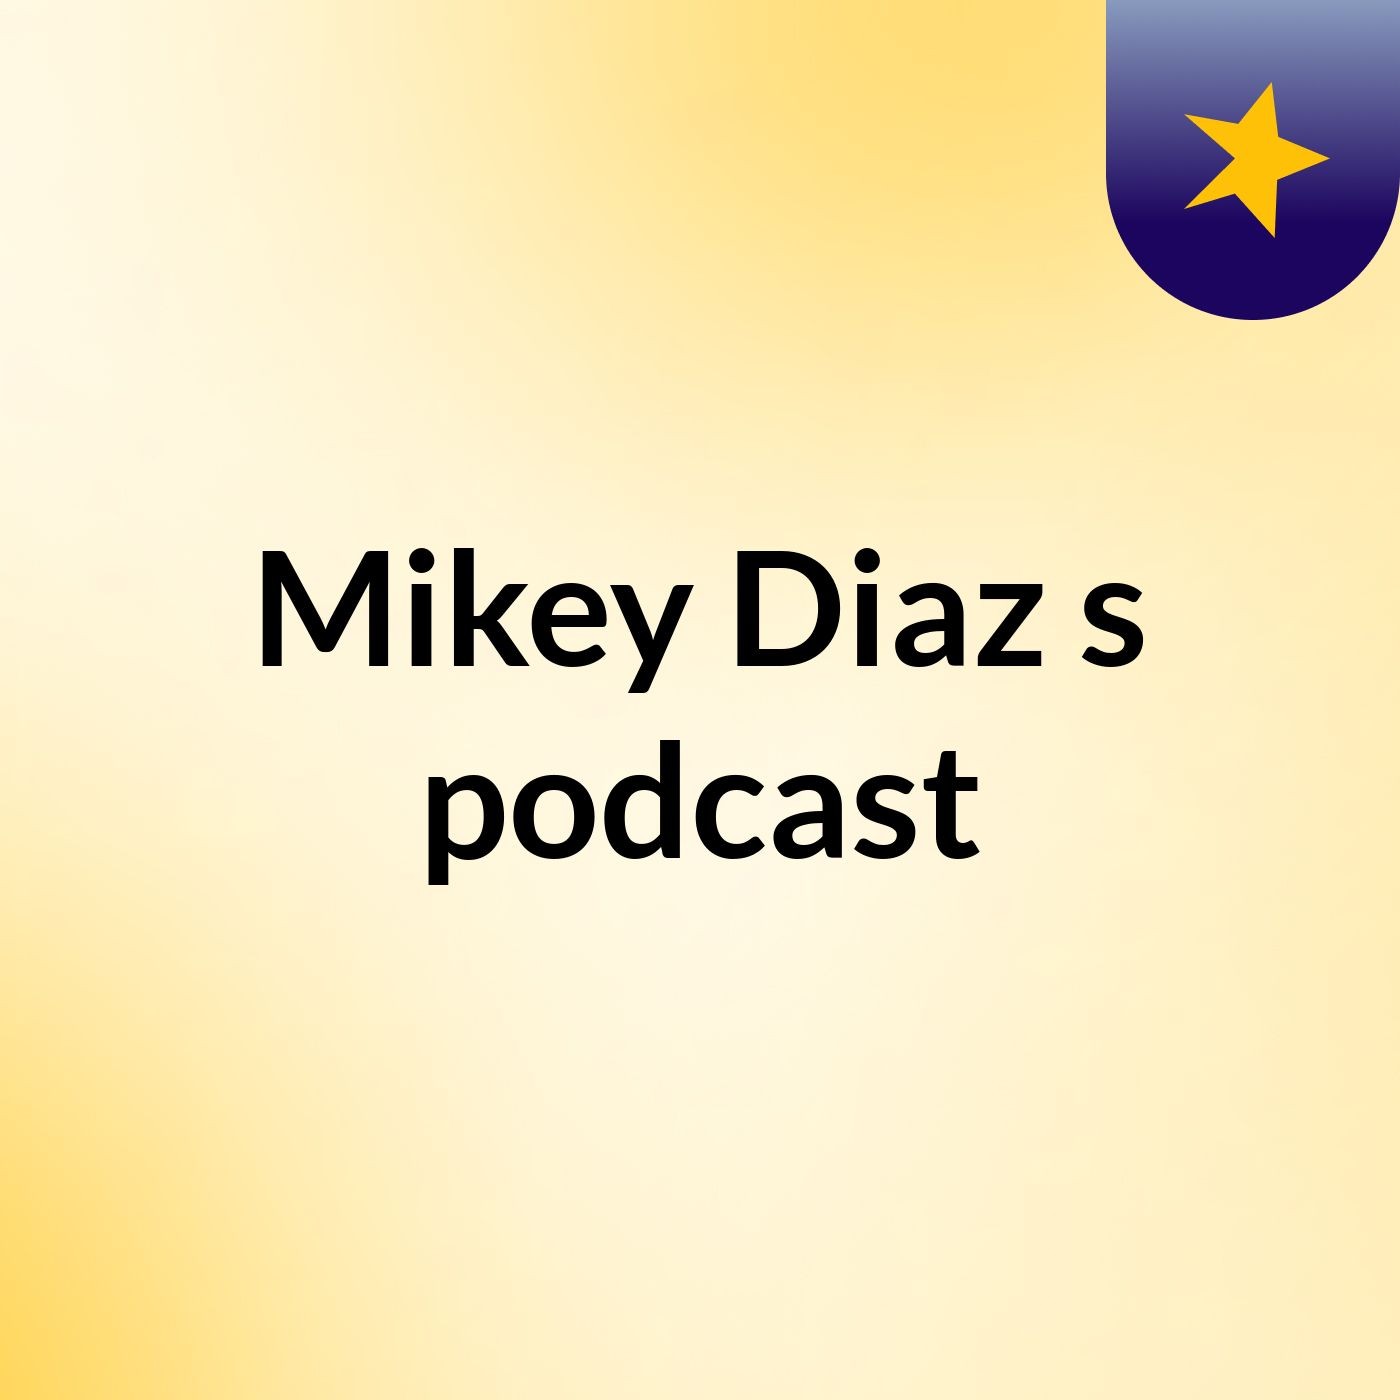 Episode 4 - Mikey Diaz's podcast